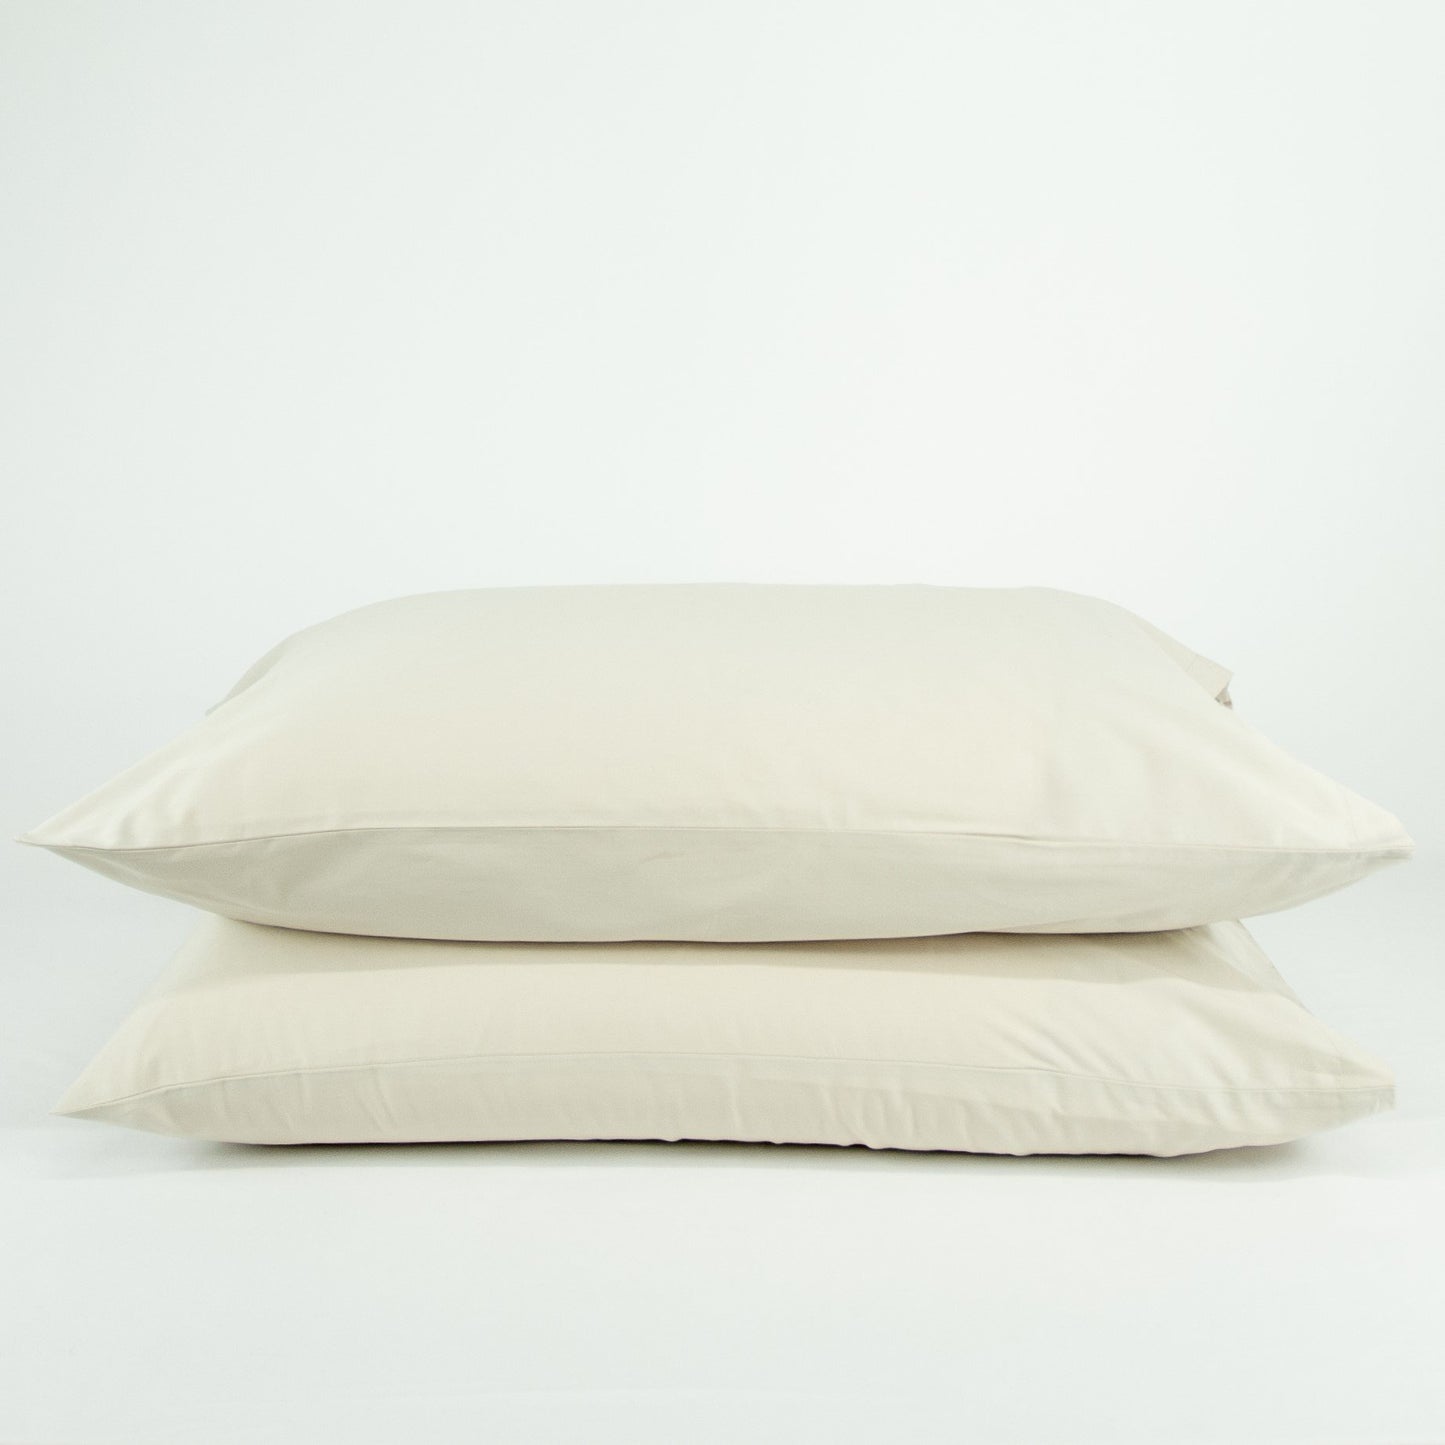 Stacked organic cotton pillowcases in egg shell white